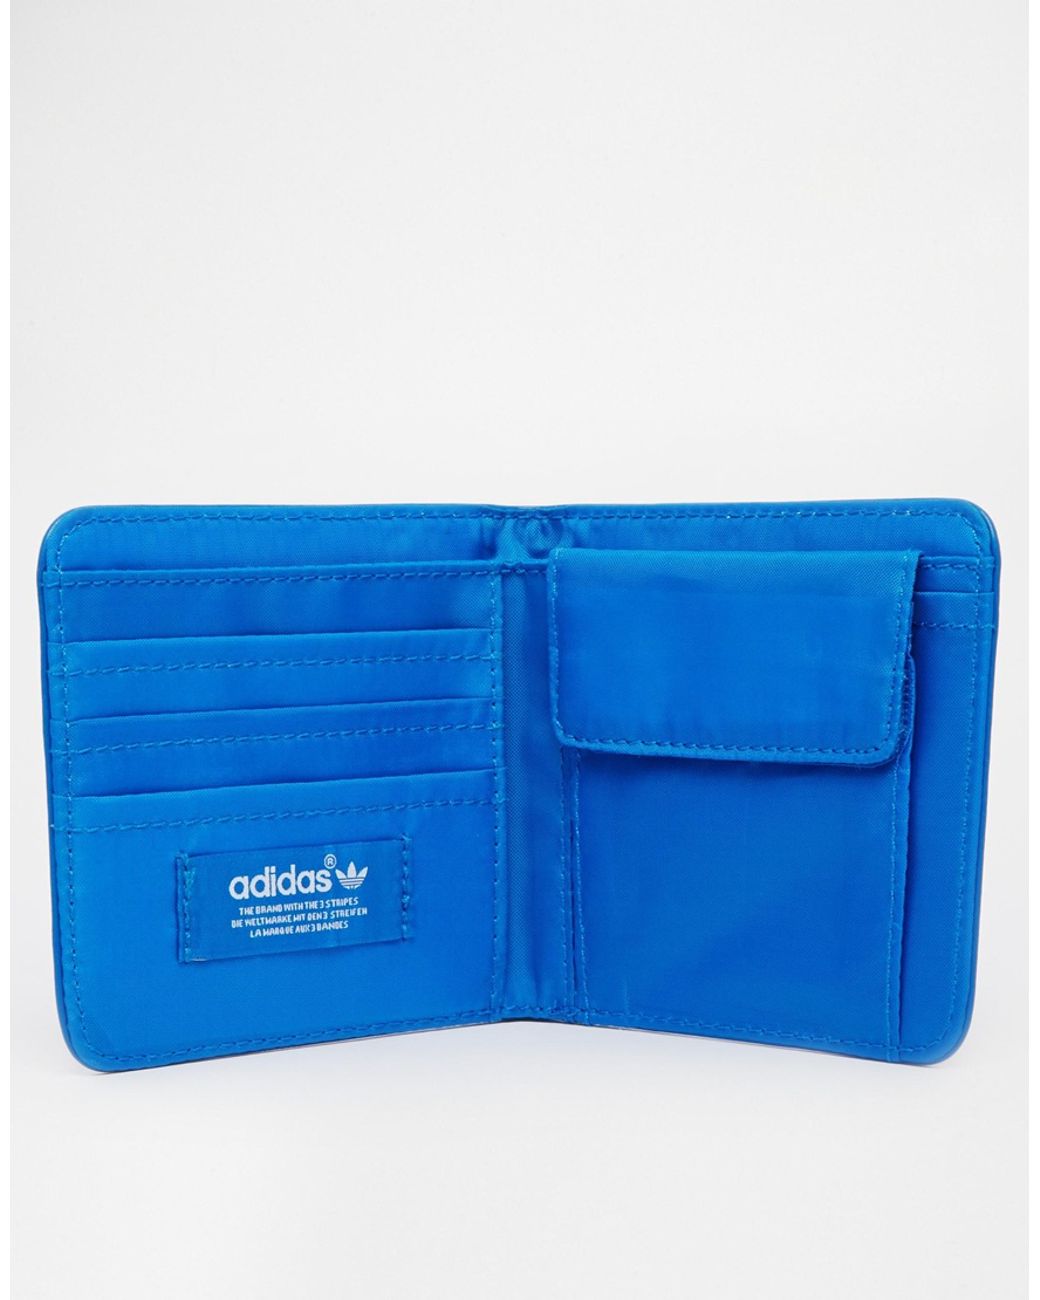 Adidas Perf ESS Wallet In India - Shopclues Online